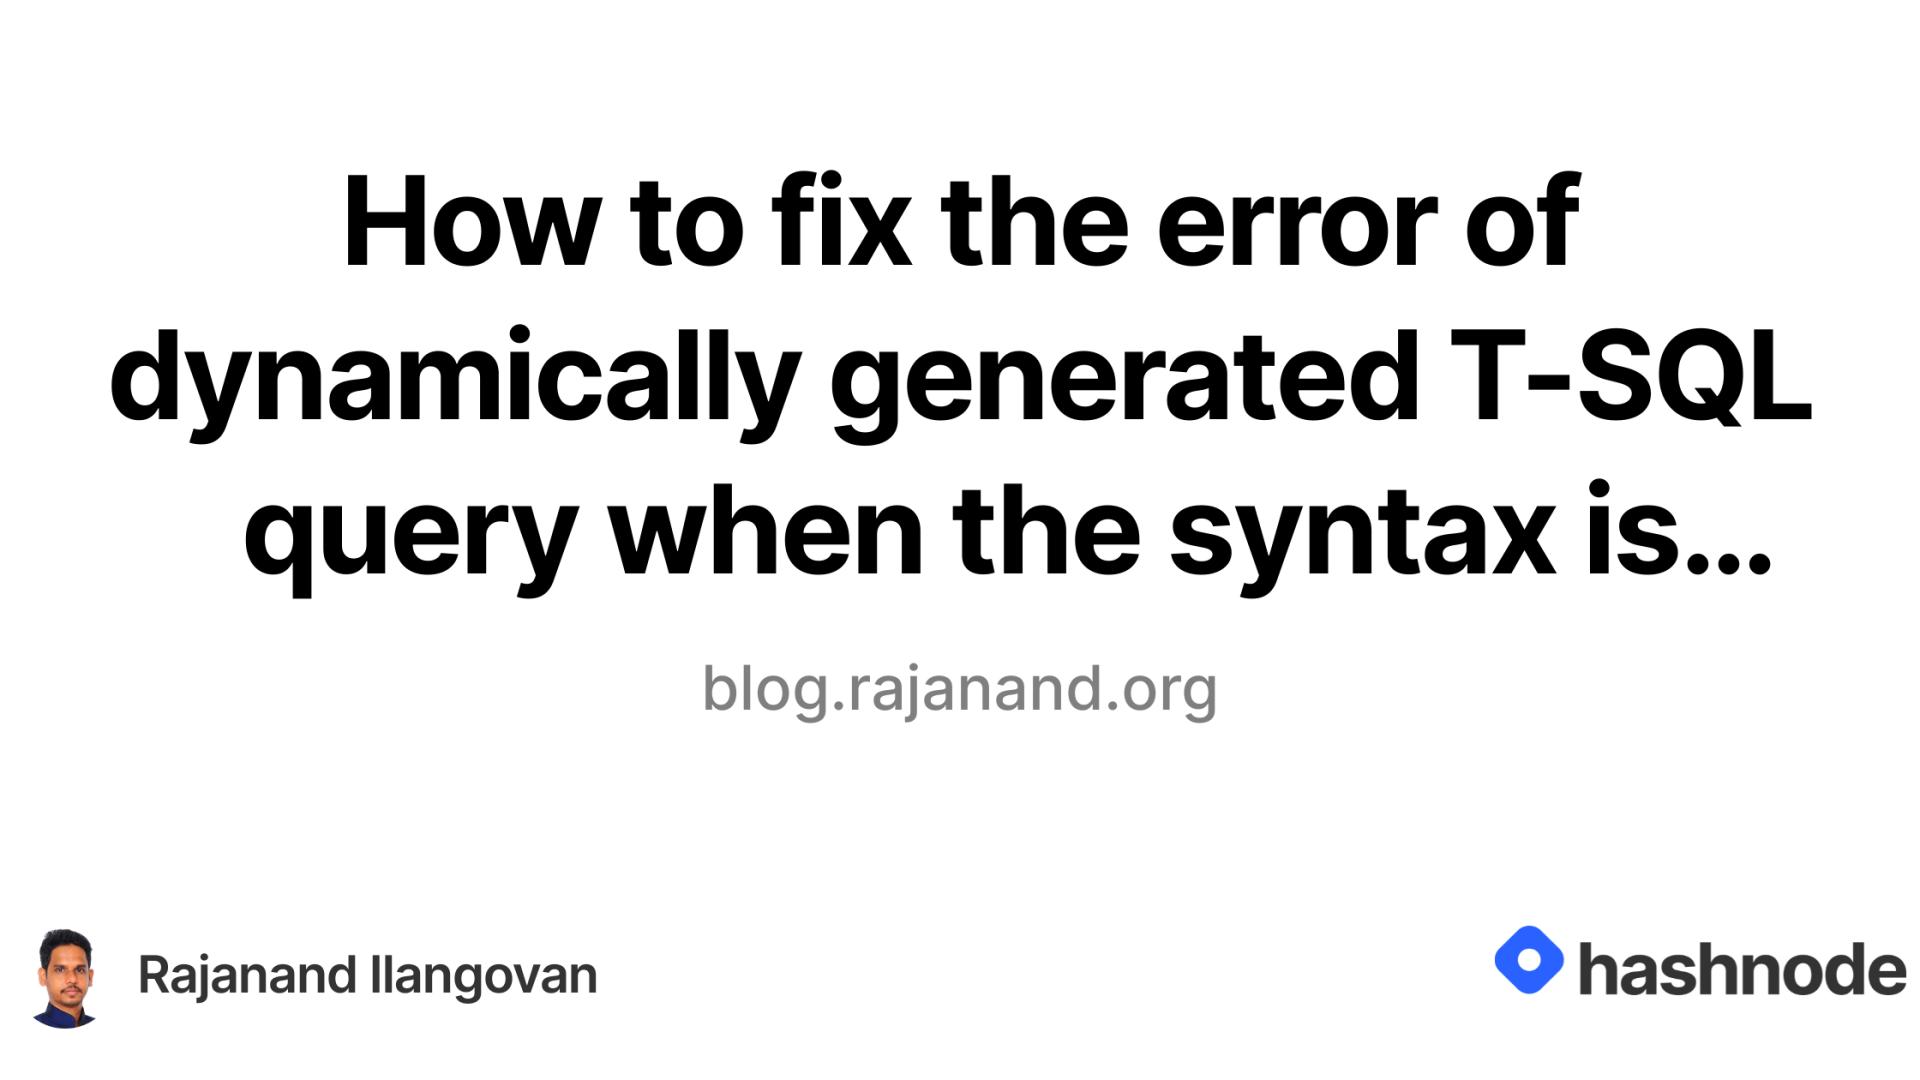 How to fix the error of dynamically generated T-SQL query when the syntax is correct?